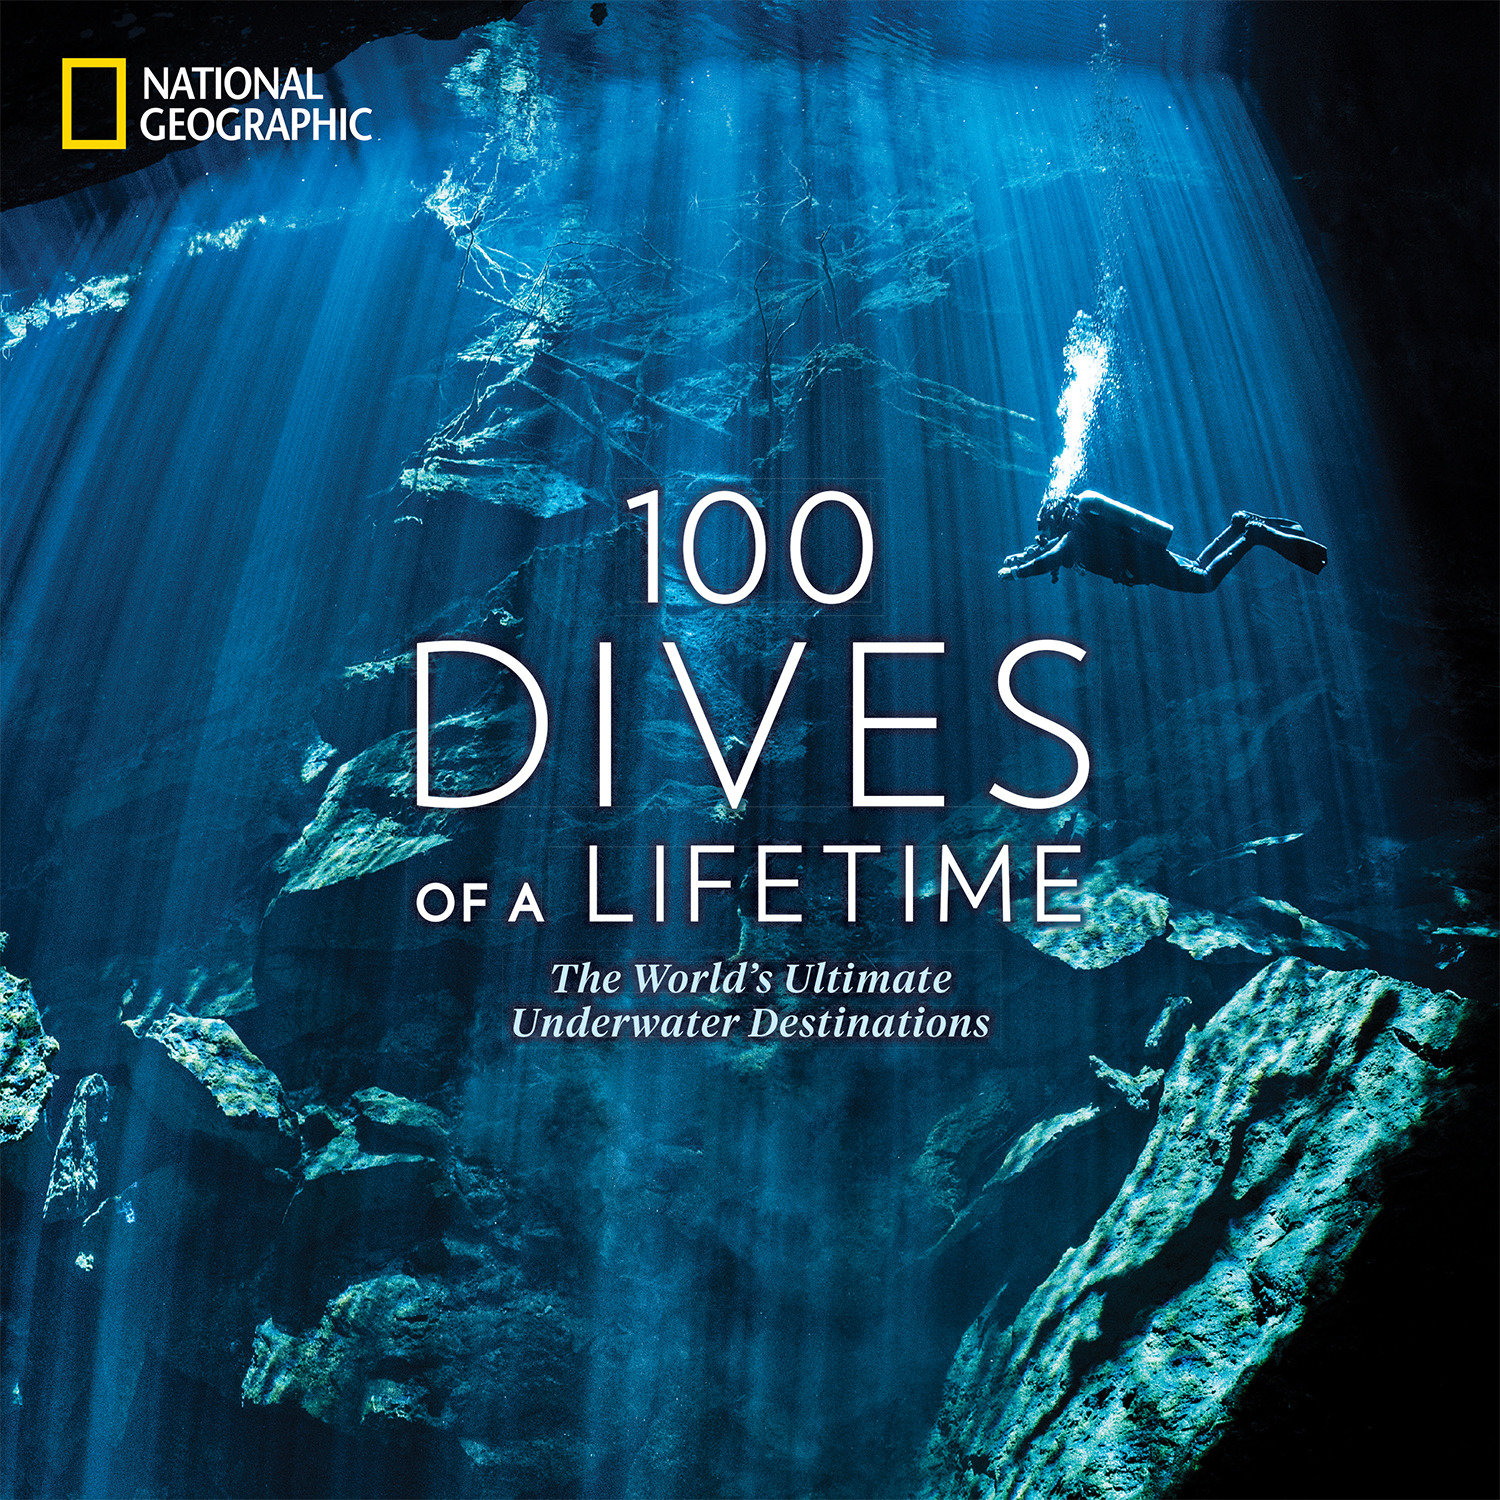 100 Dives Of A Lifetime (Hardcover Book)